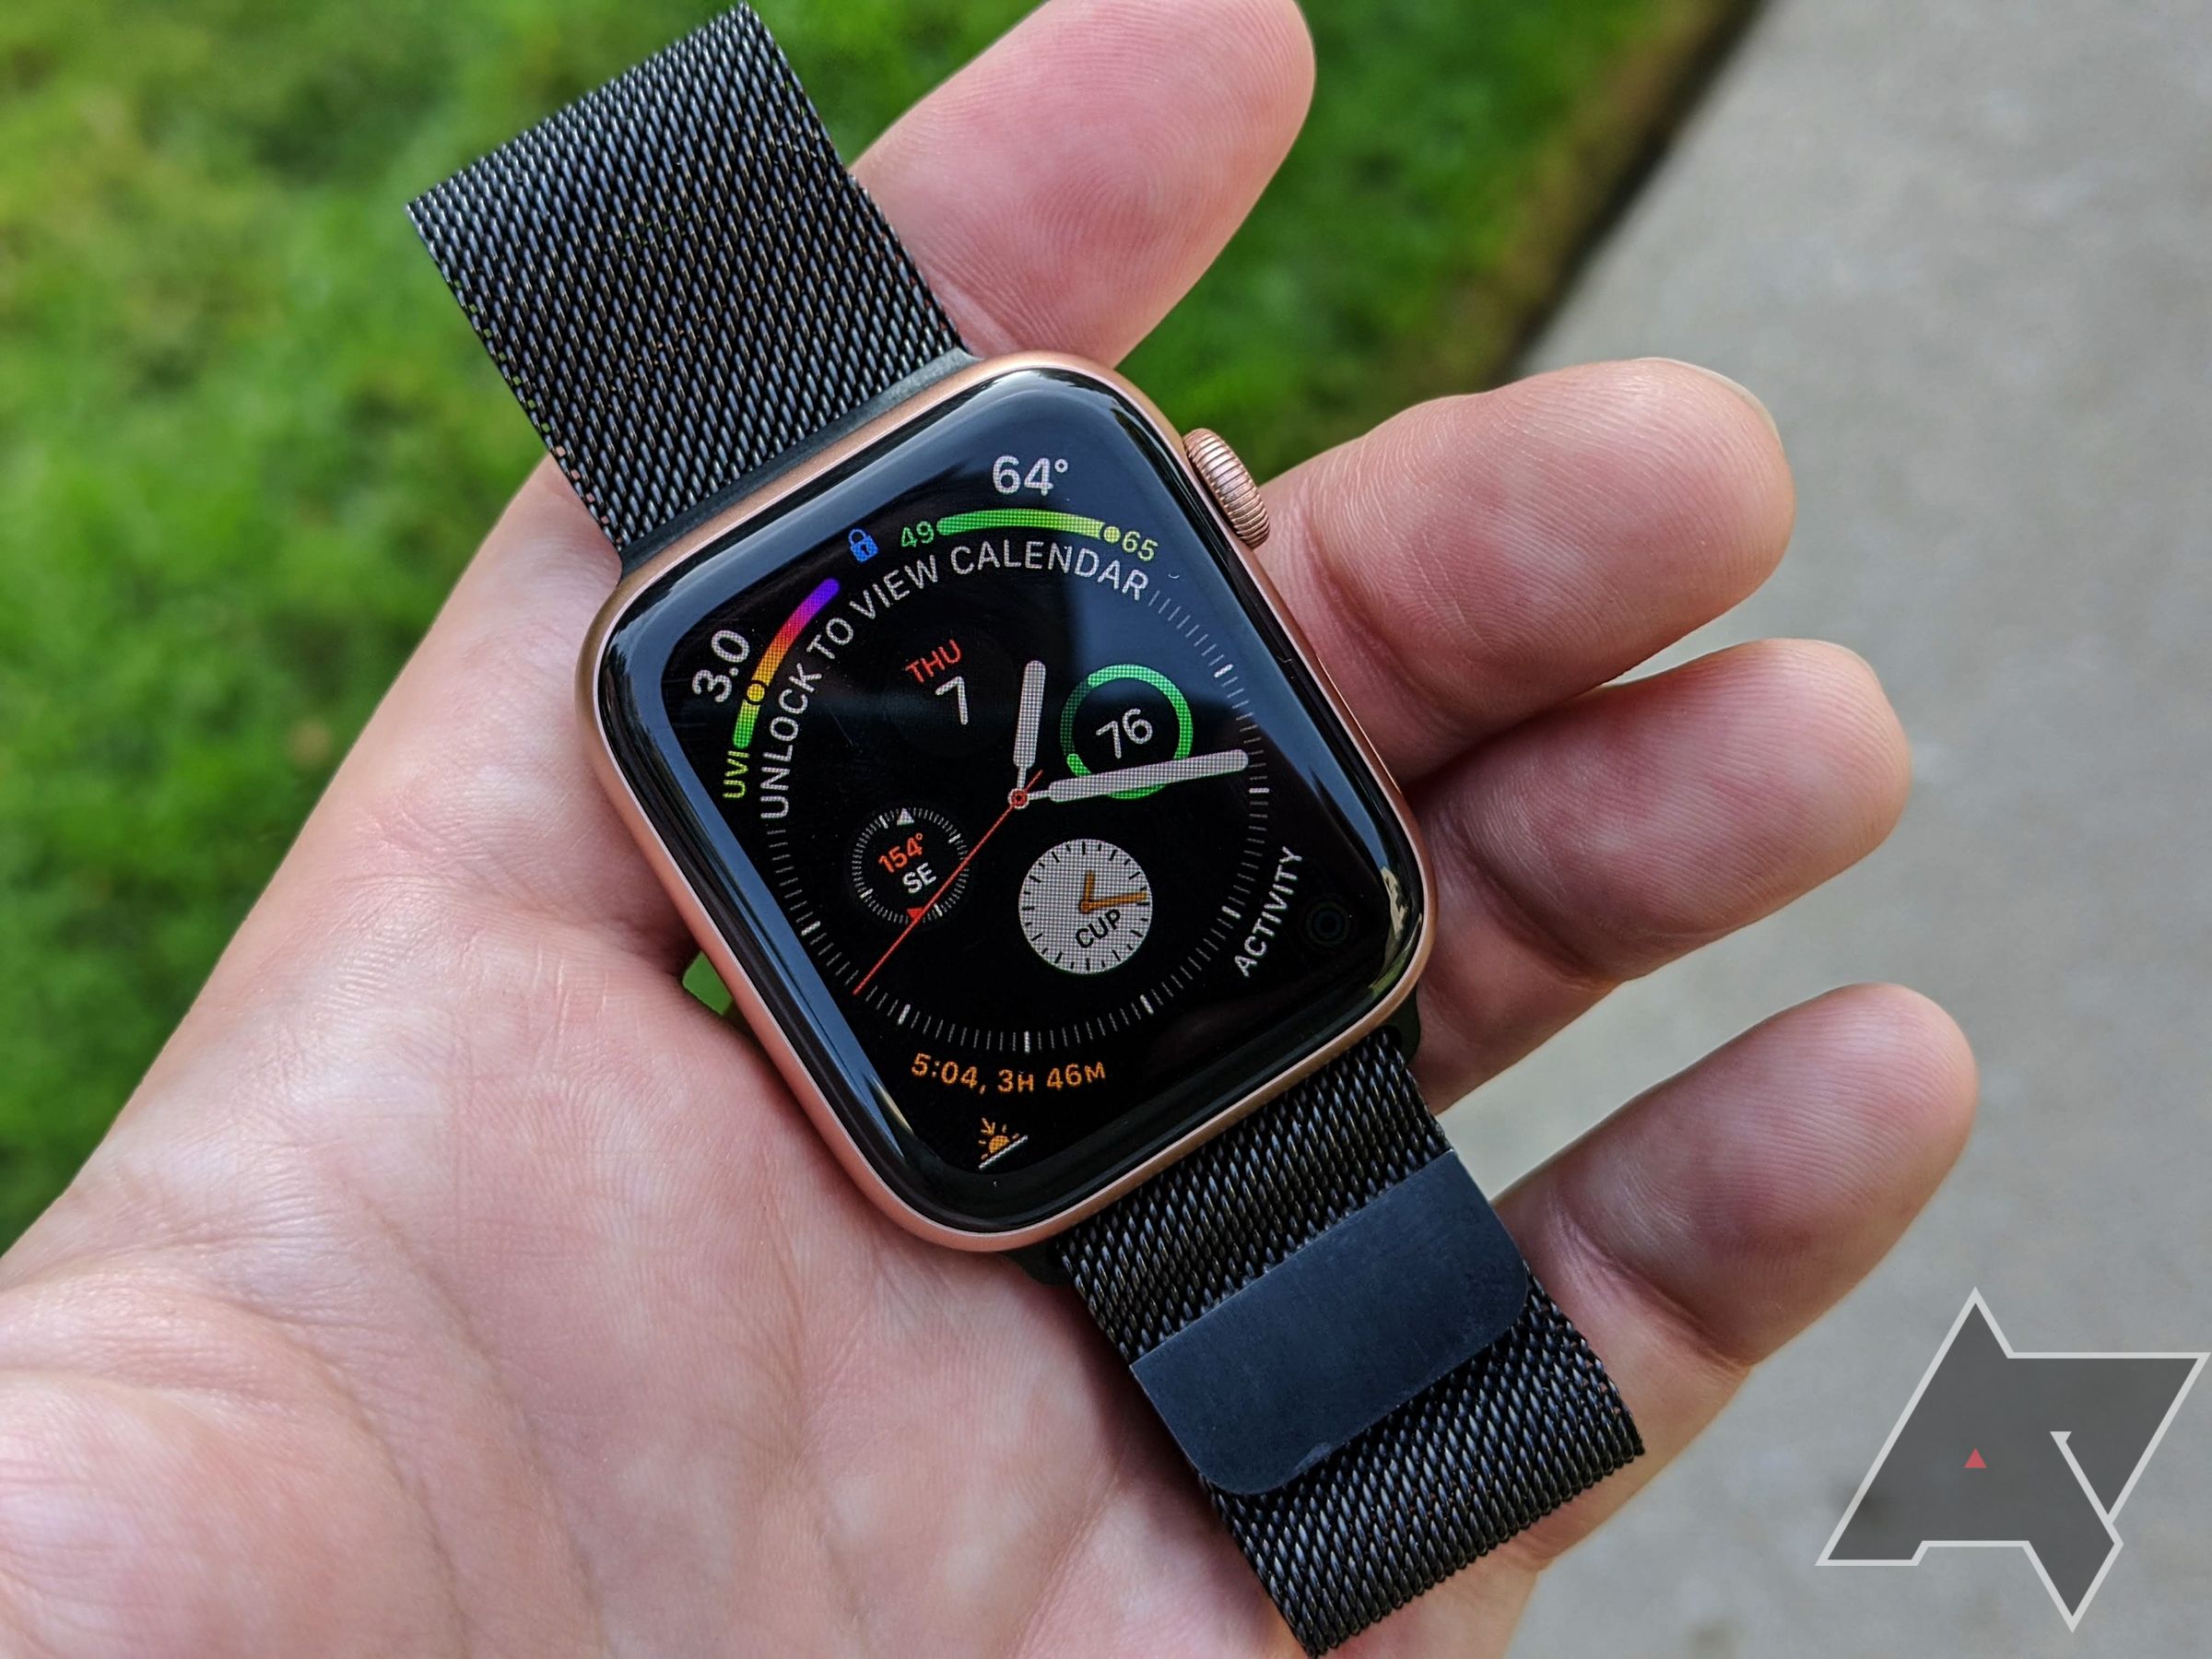 I'm an Android user who tried the Apple Watch for a month — it's now only smartwatch I'll recommend